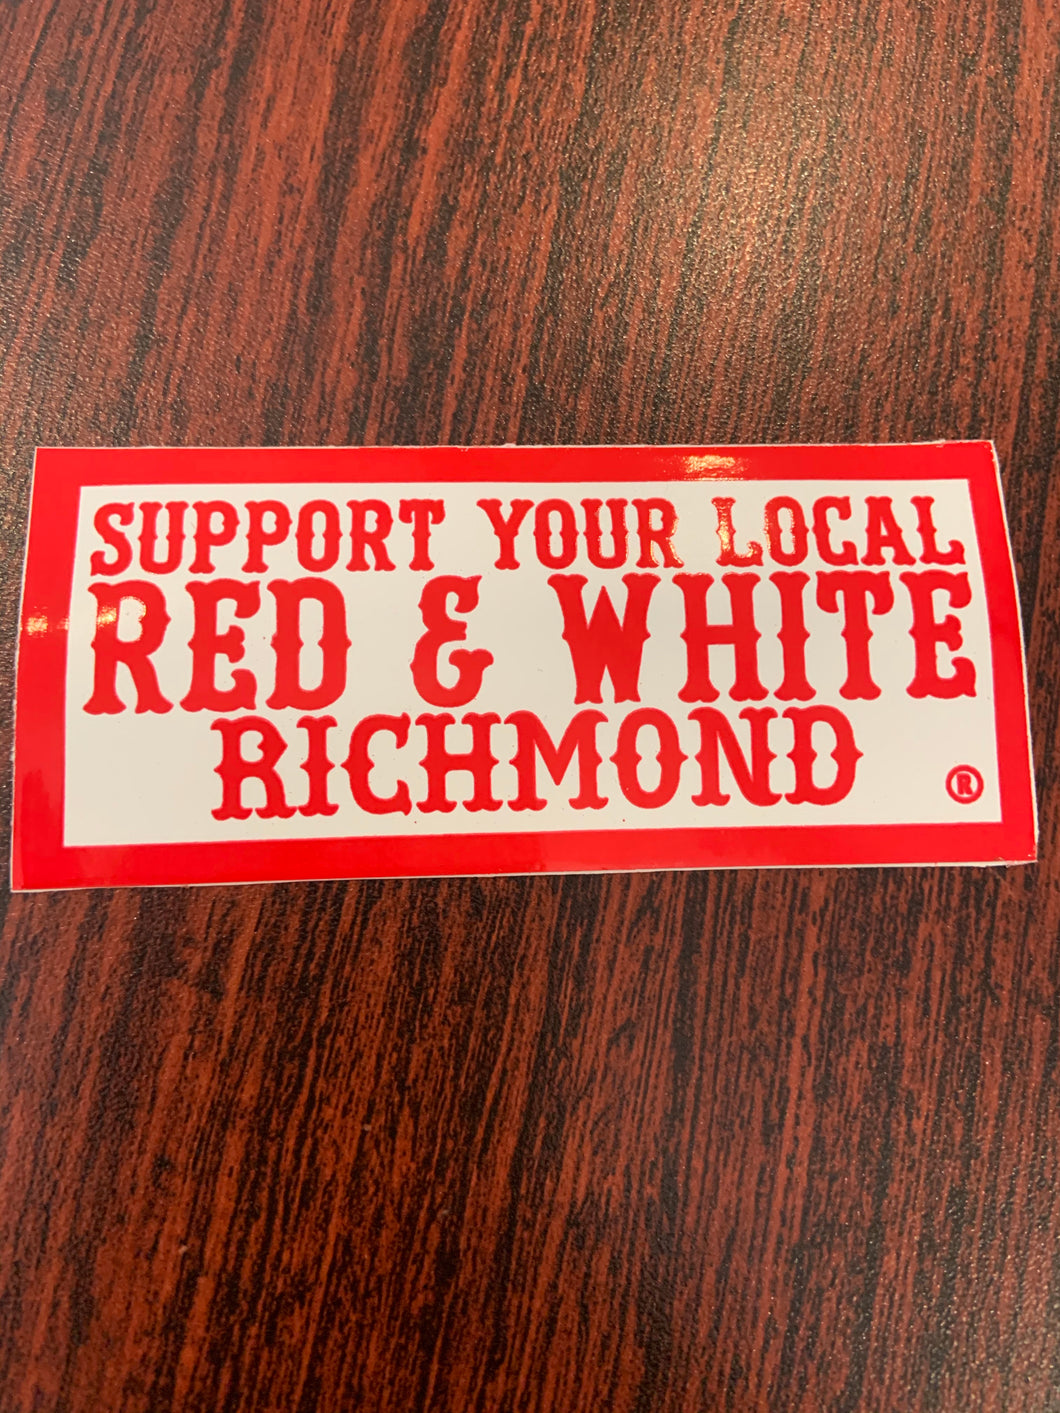 Support your local RED & WHITE RICHMOND